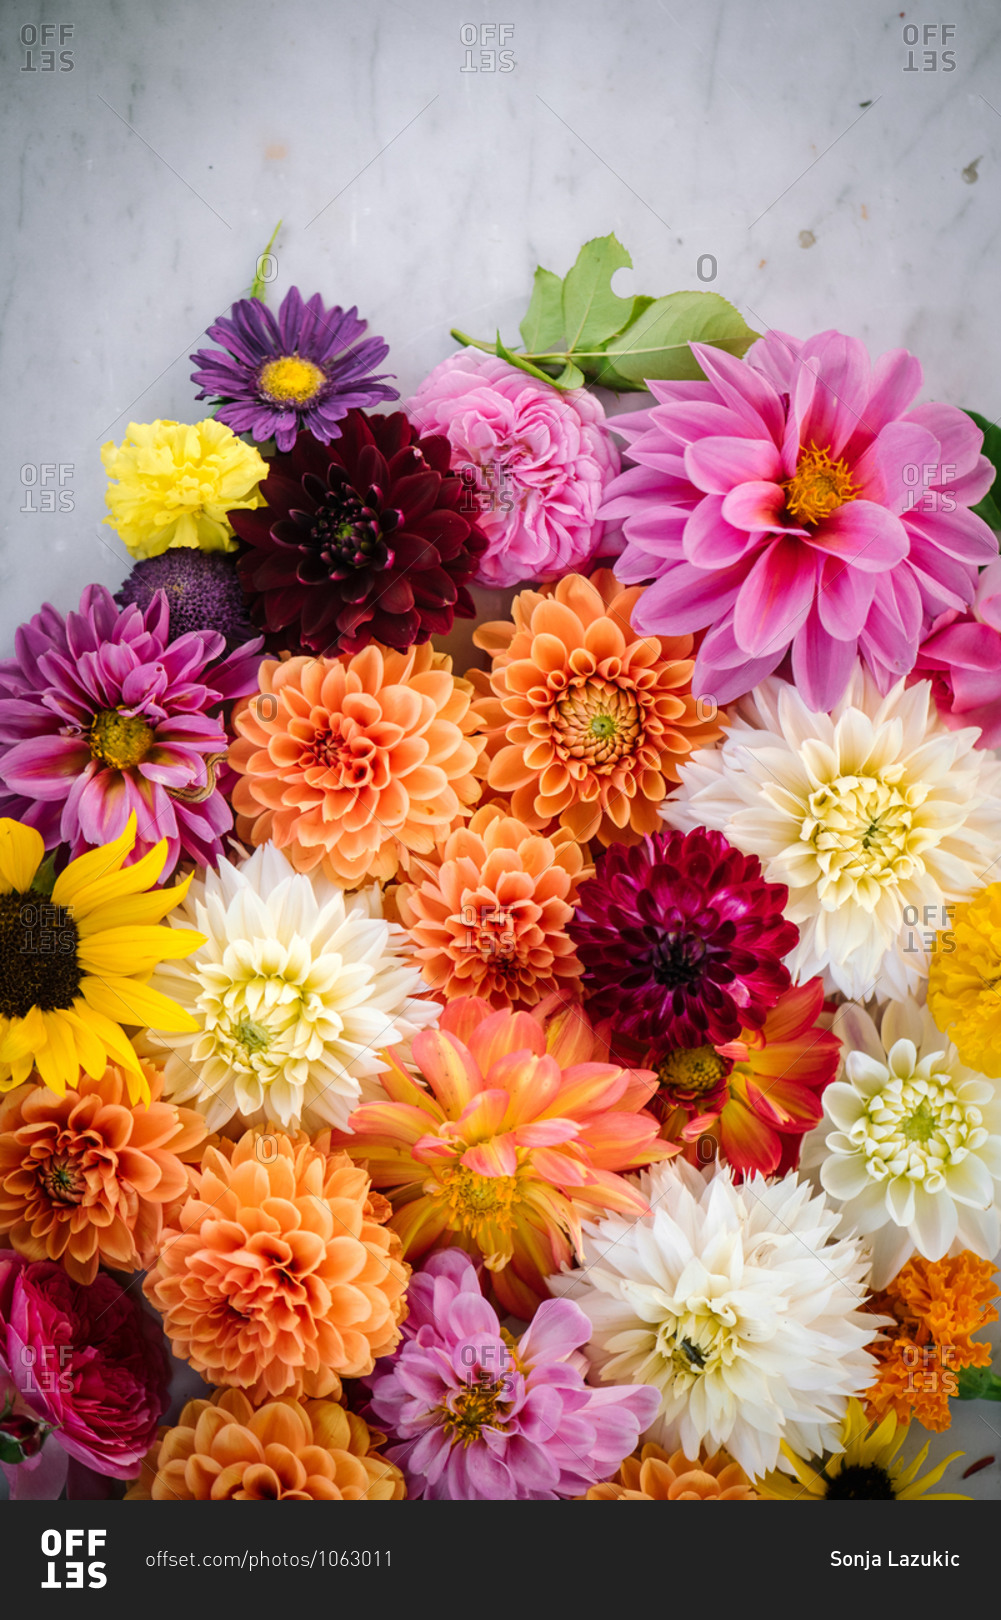 Close up of a beautiful and vibrant floral arrangement